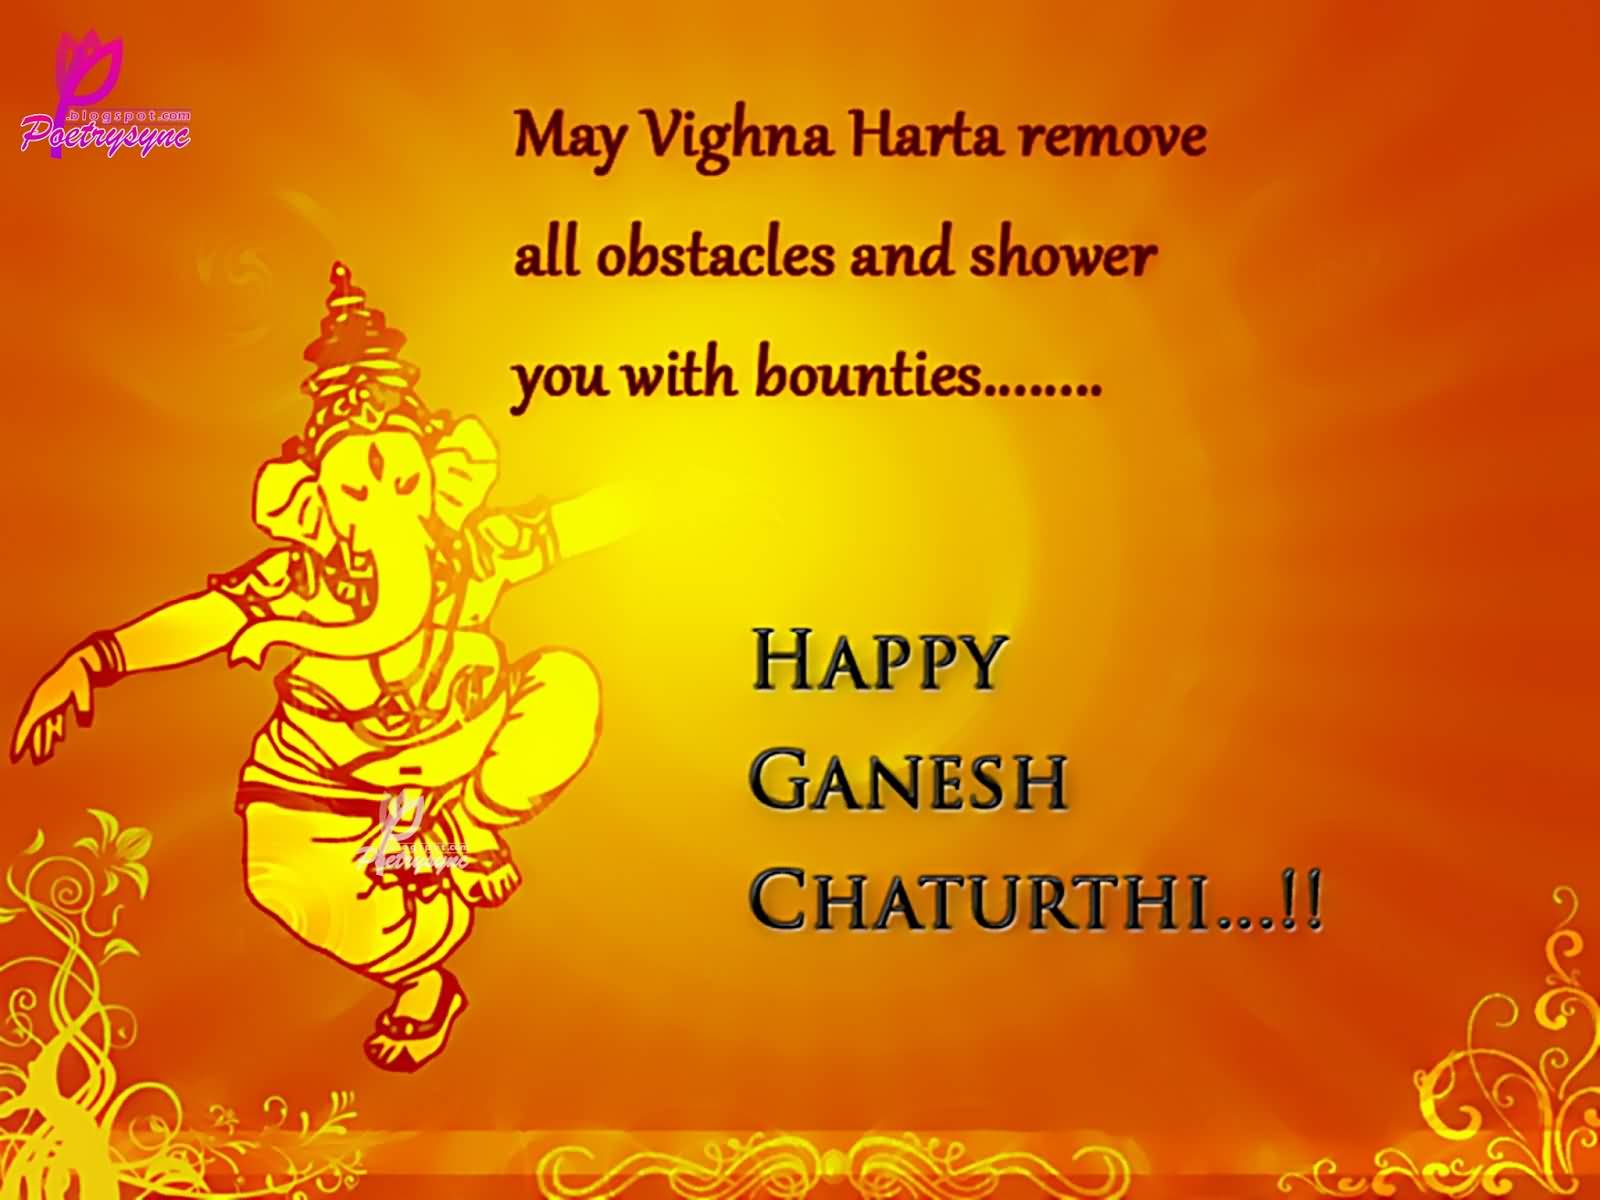 May Vighan Harta Remove All Obstacles And Shower You With Bounties Happy Ganesh Chaturthi